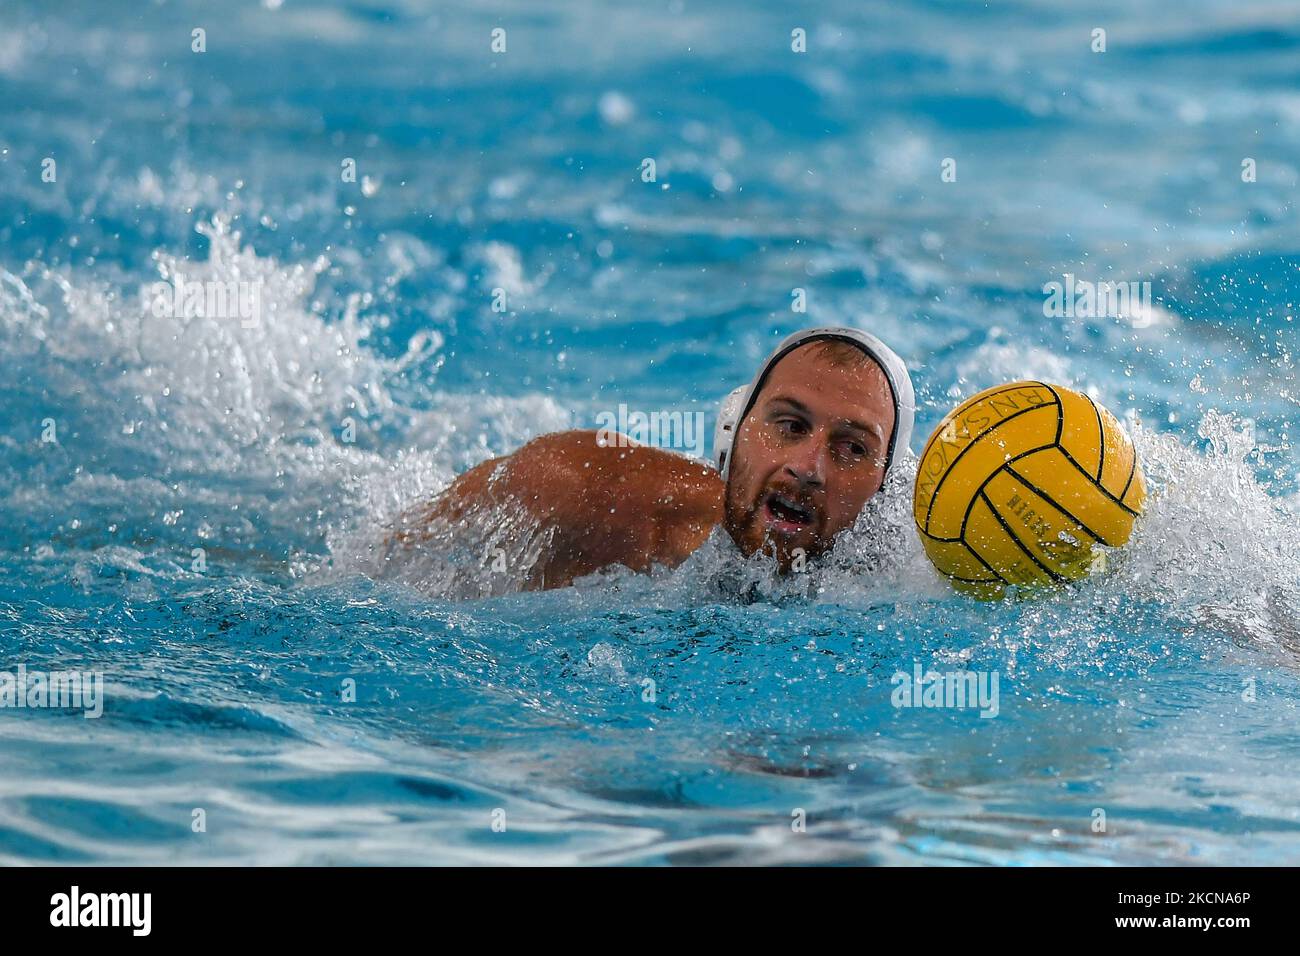 Radnicki claims historical shootout win to beat Primorac - LEN Water Polo  Champions League